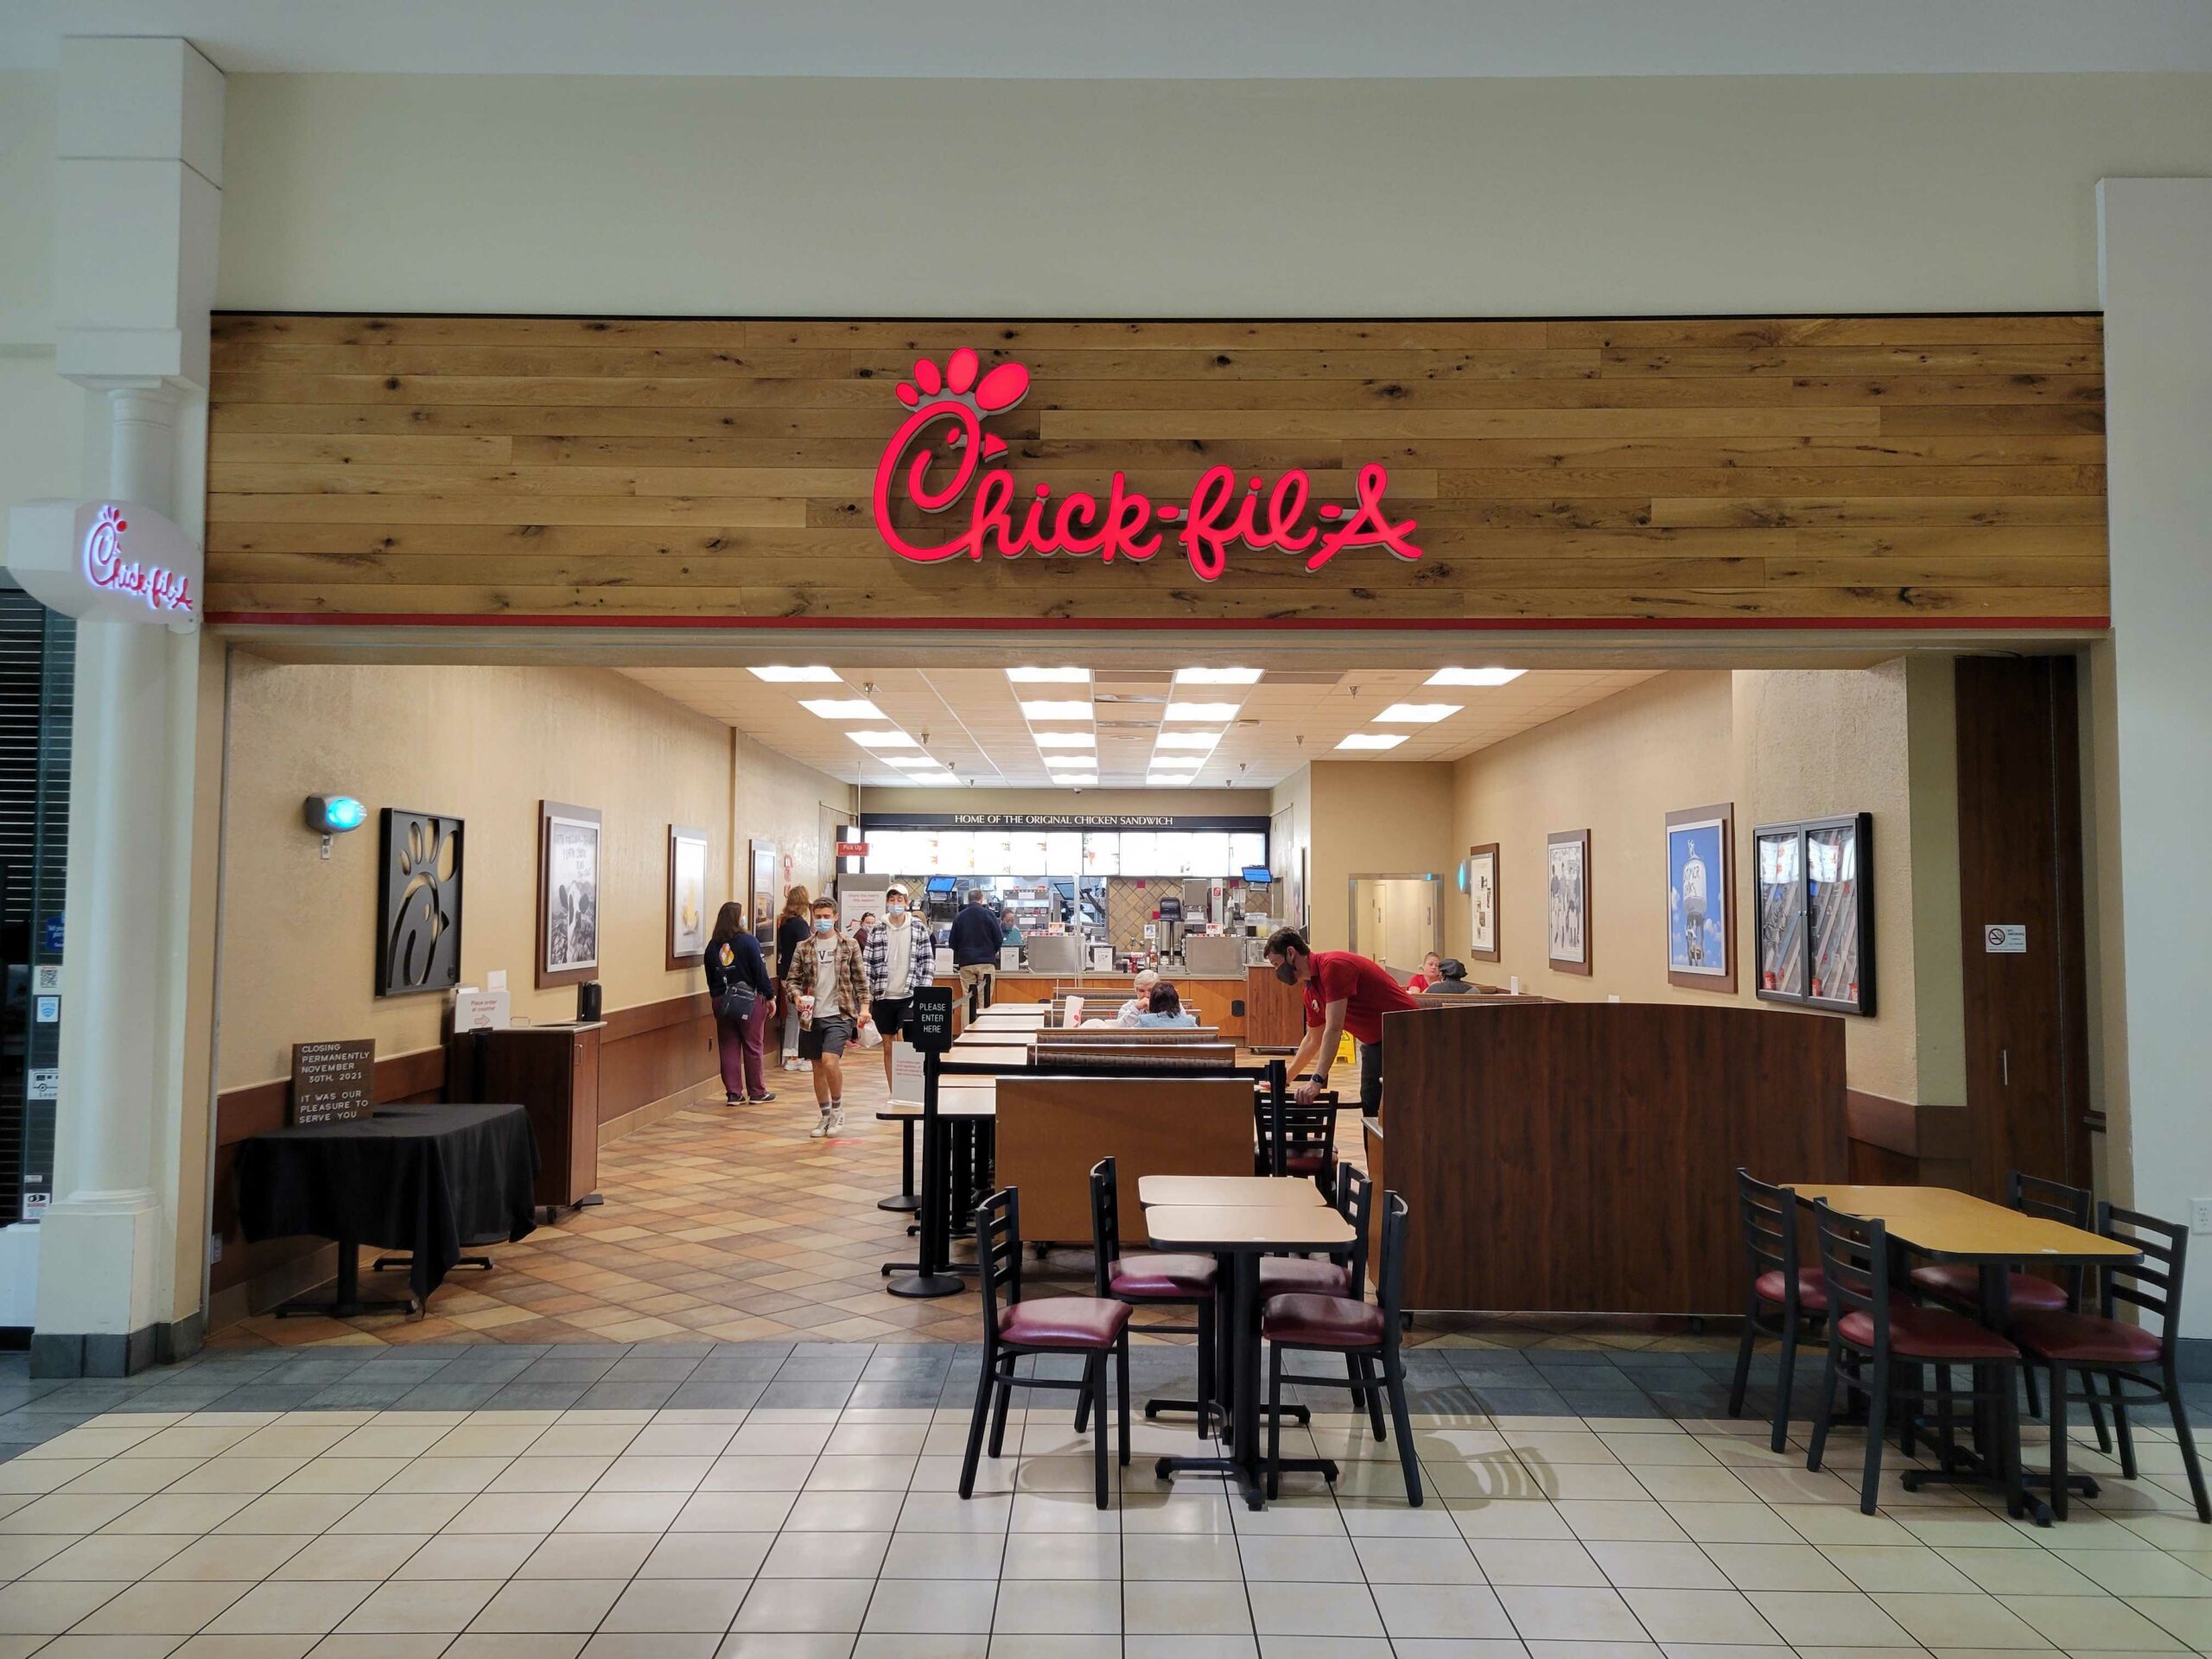 Galleria food court - Review of Chick-fil-A, Houston, TX - Tripadvisor